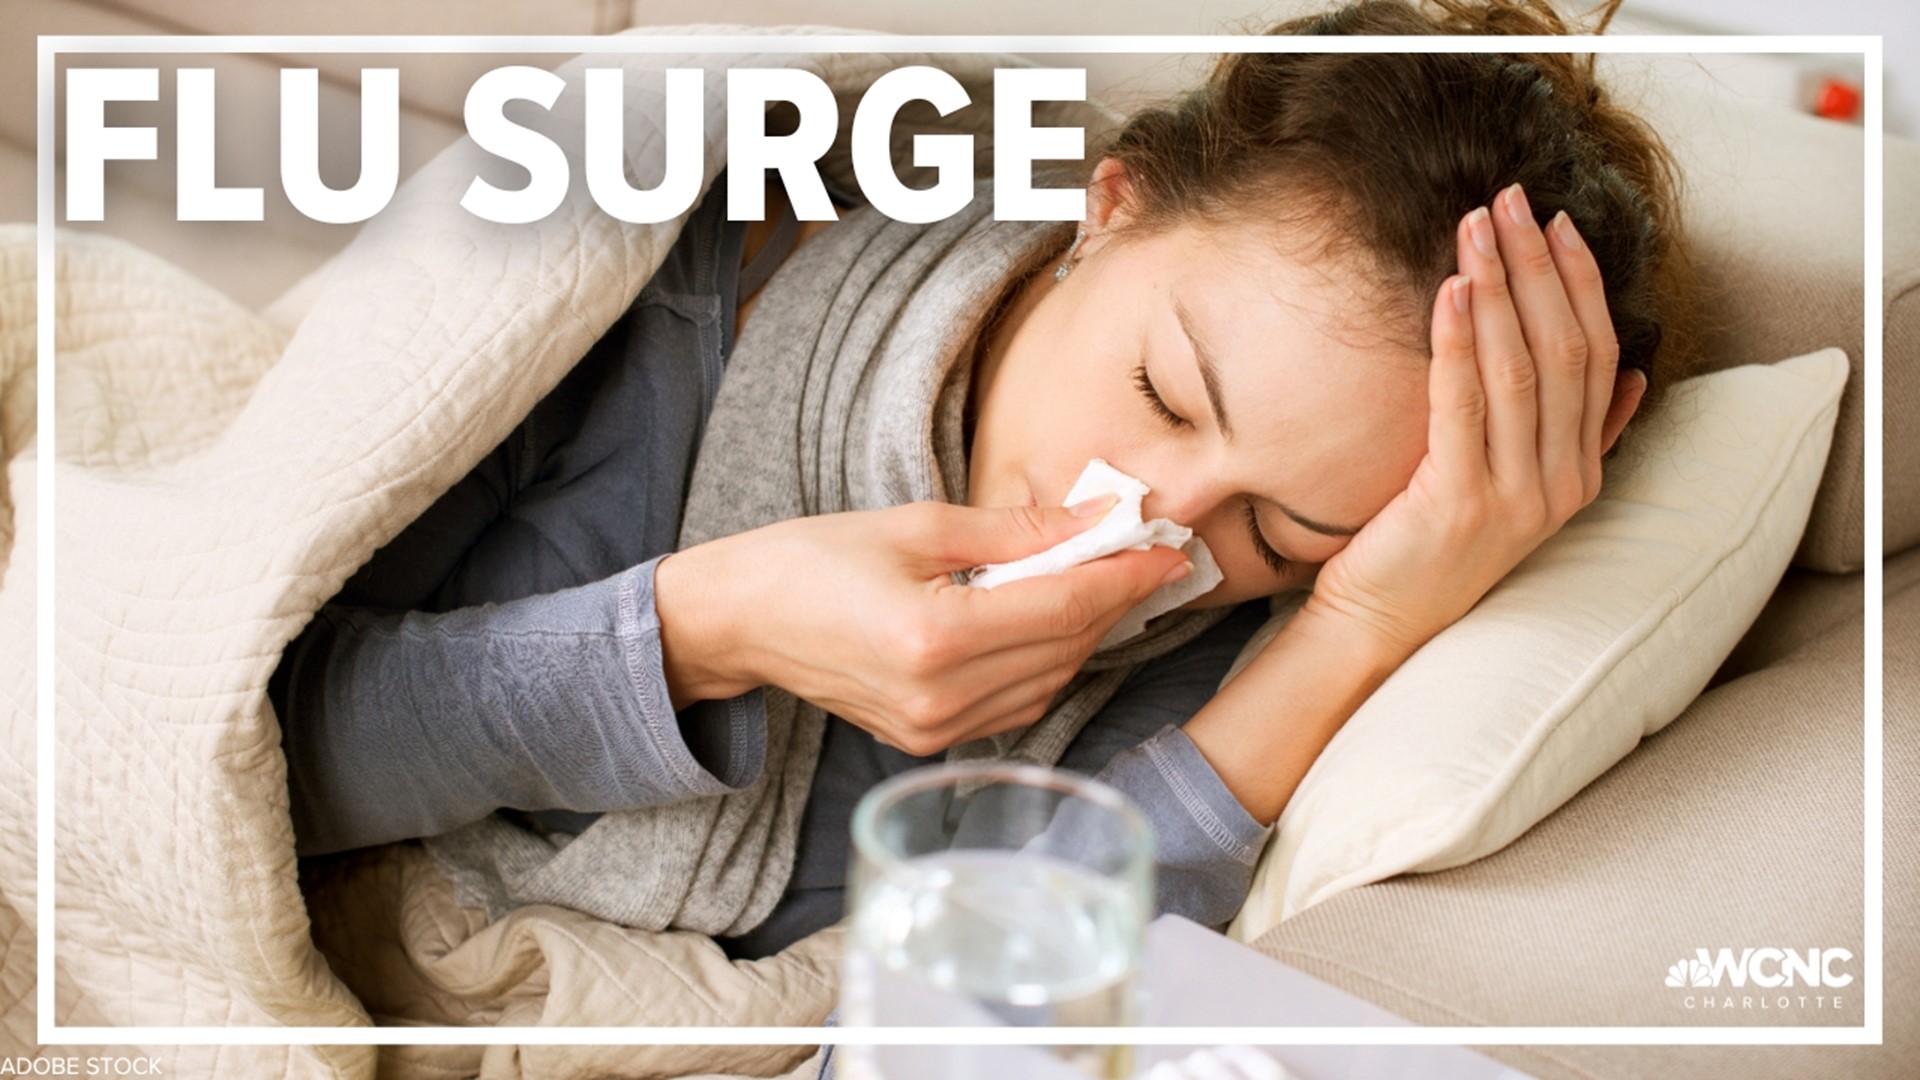 Experts say a surge of flu like the one seen this year has not been seen in more than a decade.